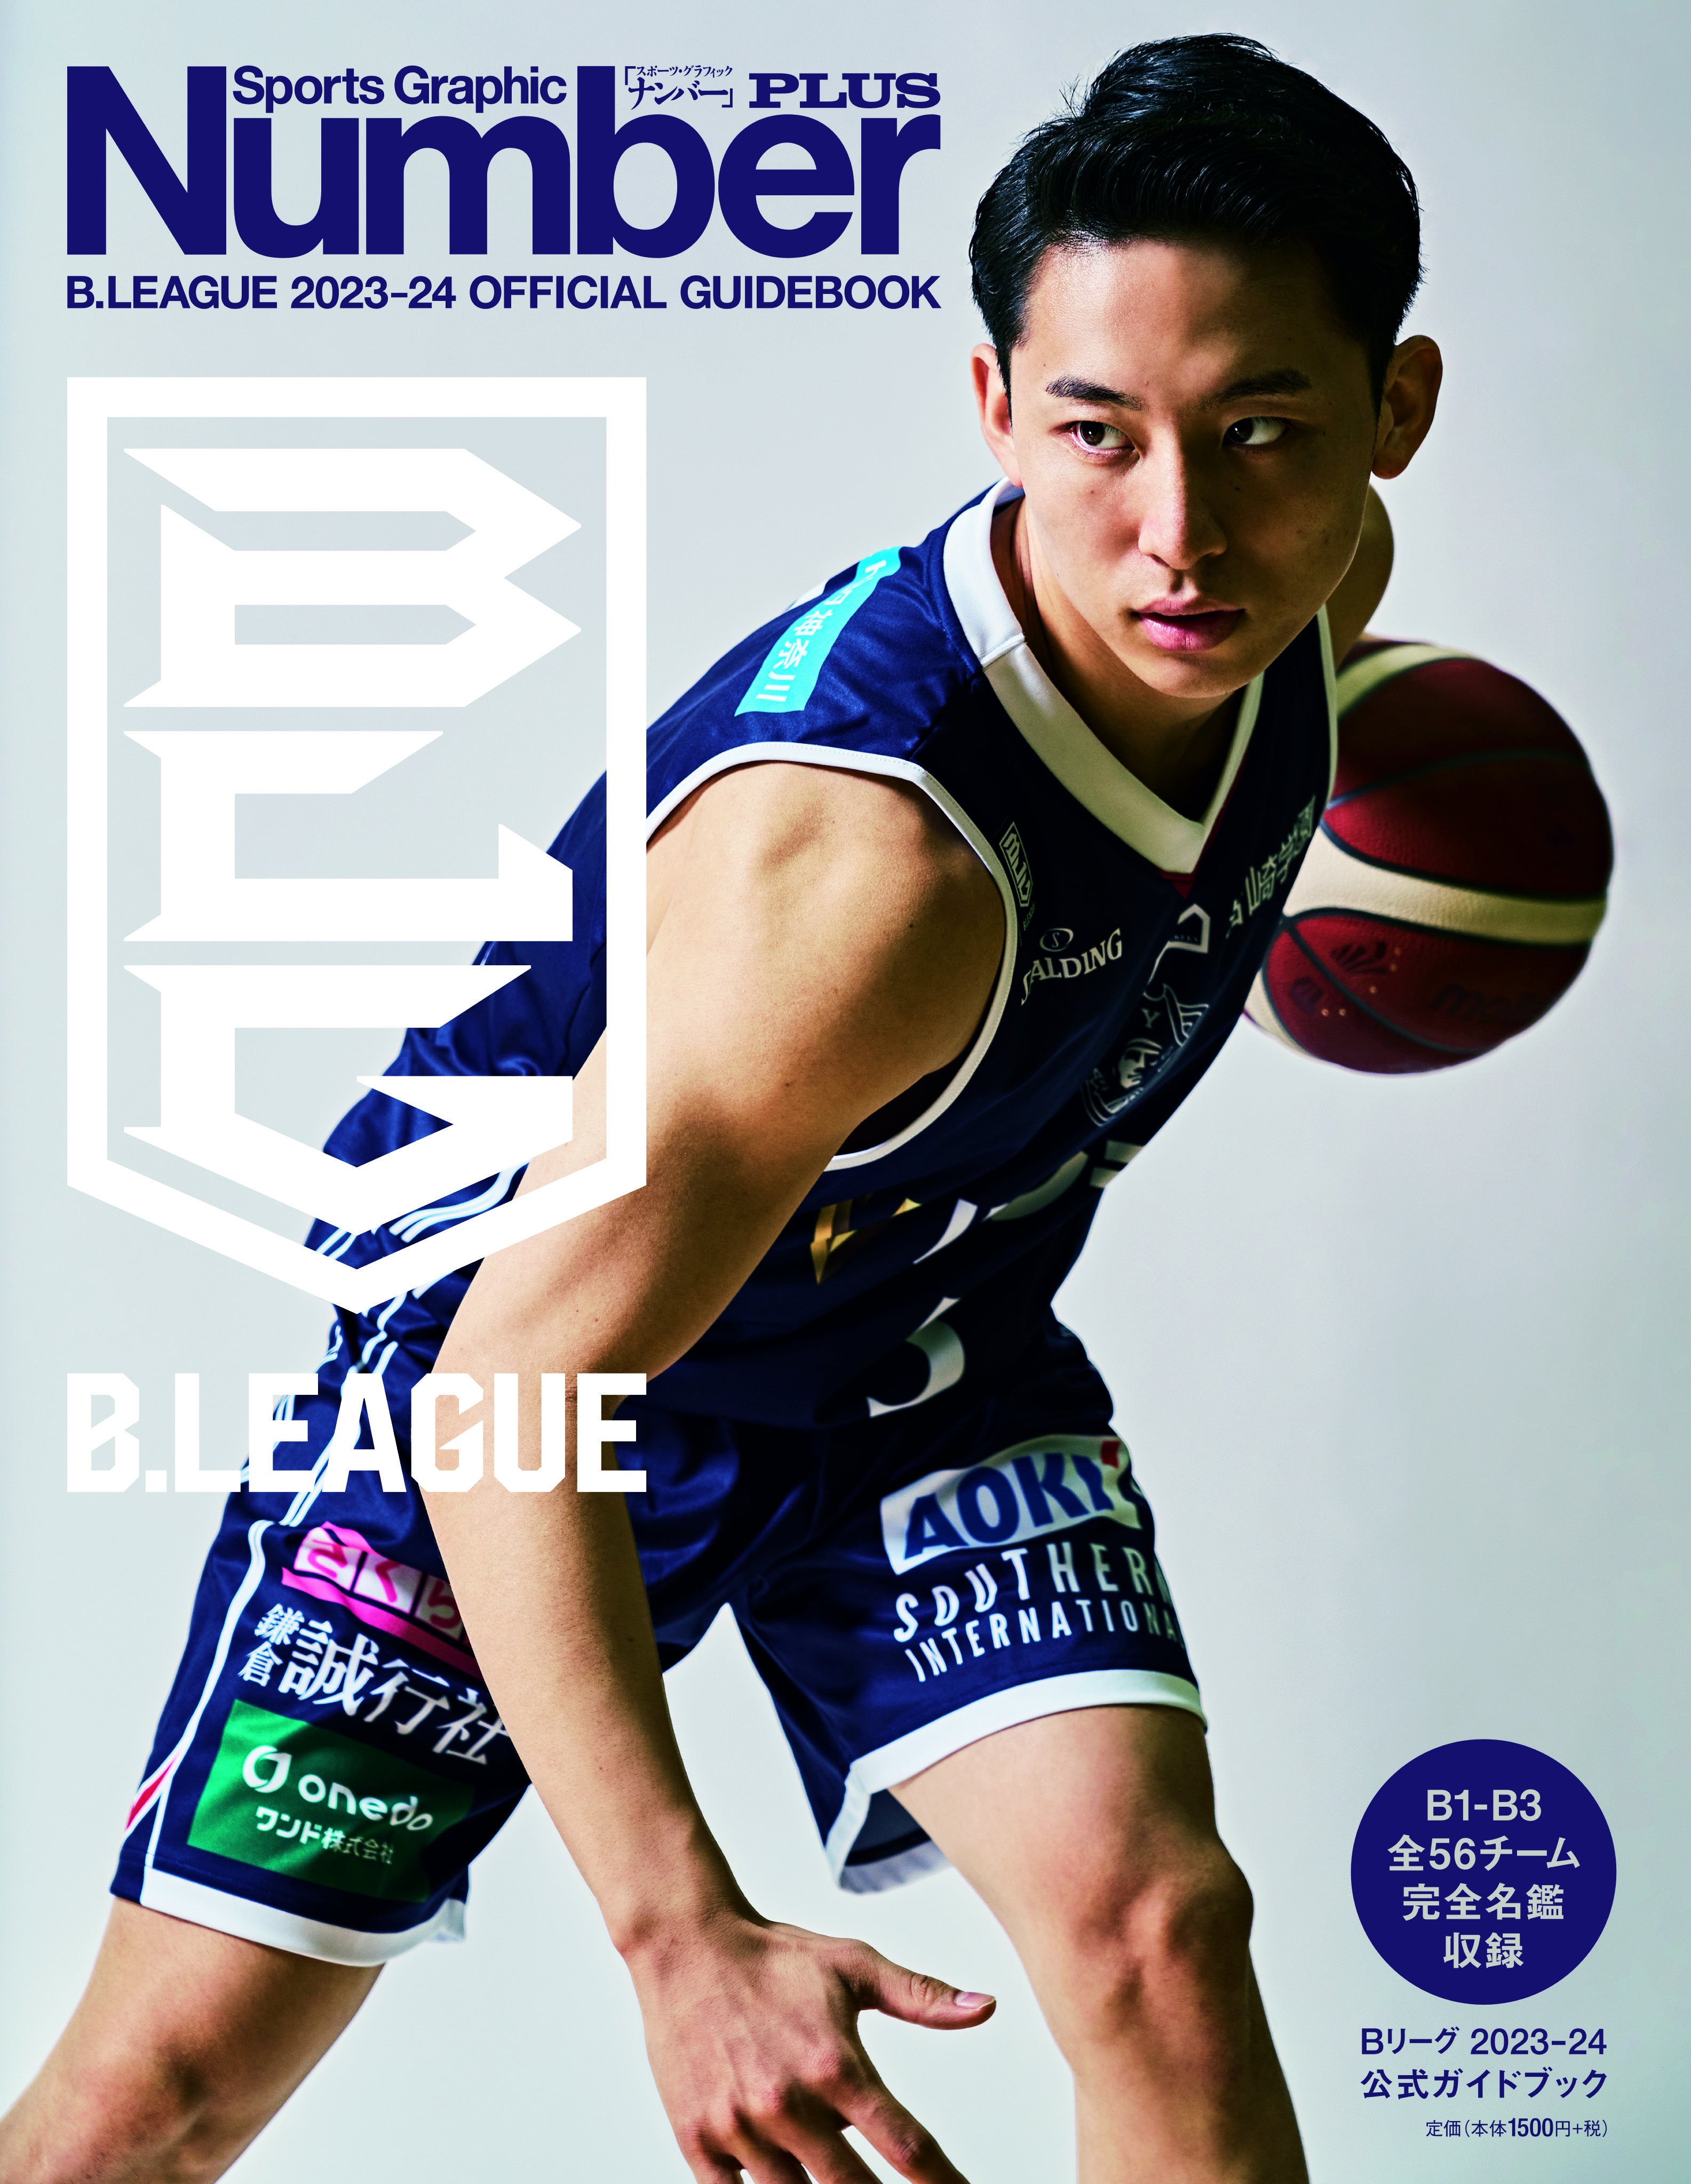 「Number PLUS B.LEAGUE 2023-24 OFFICIAL GUIDEBOOK」発刊のお知らせ